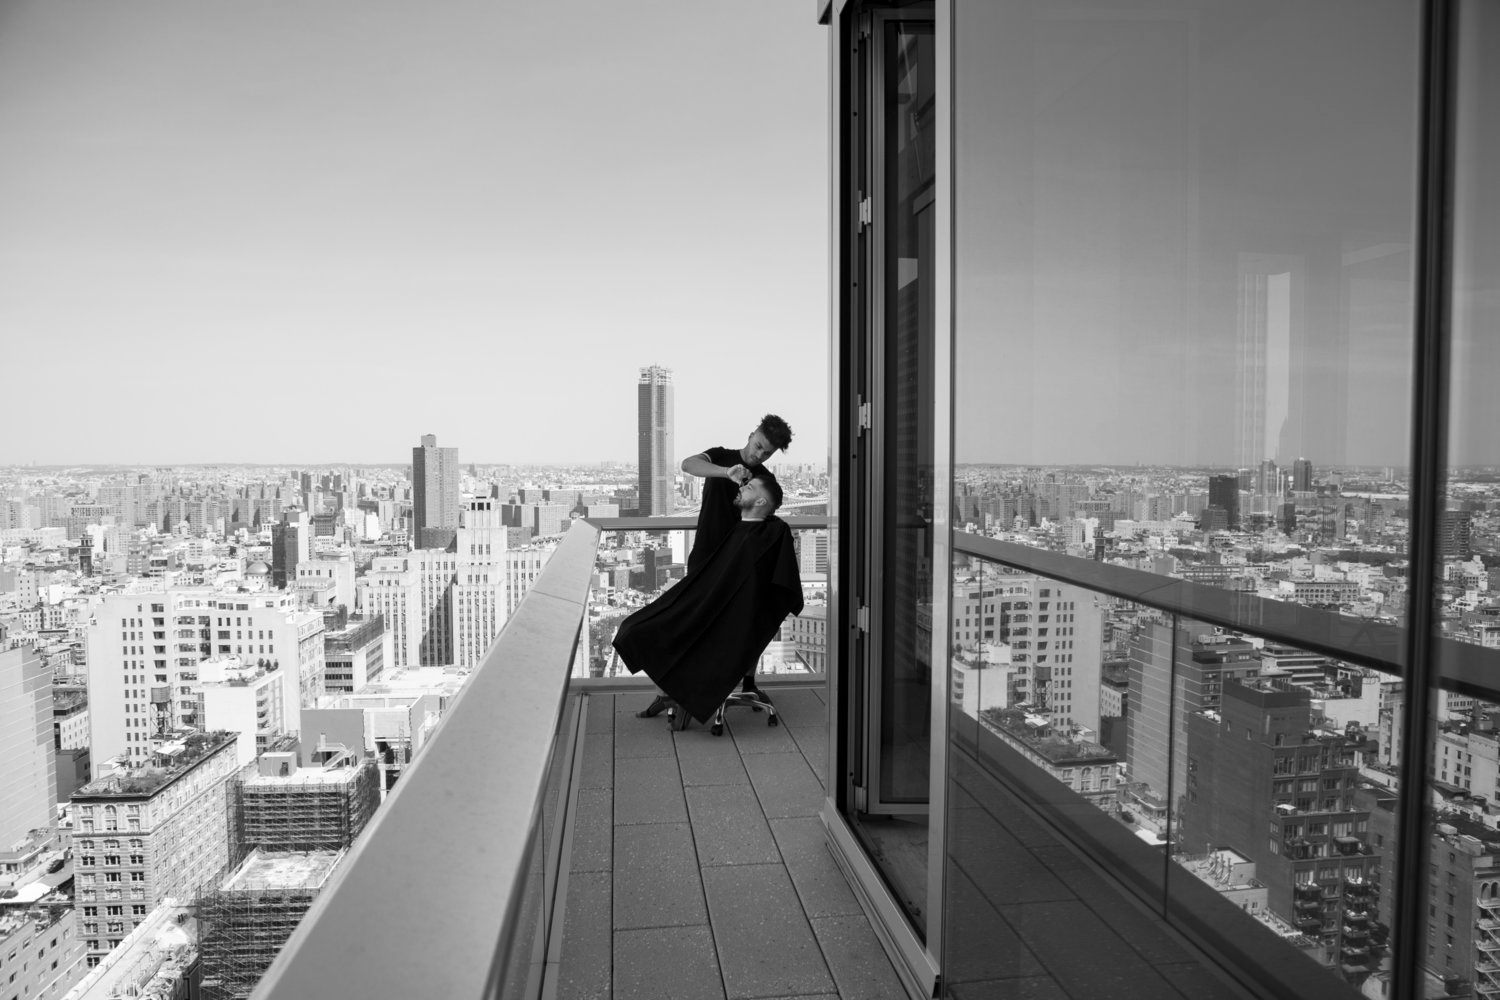 Julien Howard a.k.a. Velo Barber cutting a person's hair high up on the deck of a sky scraper with vast view of city skyline in background